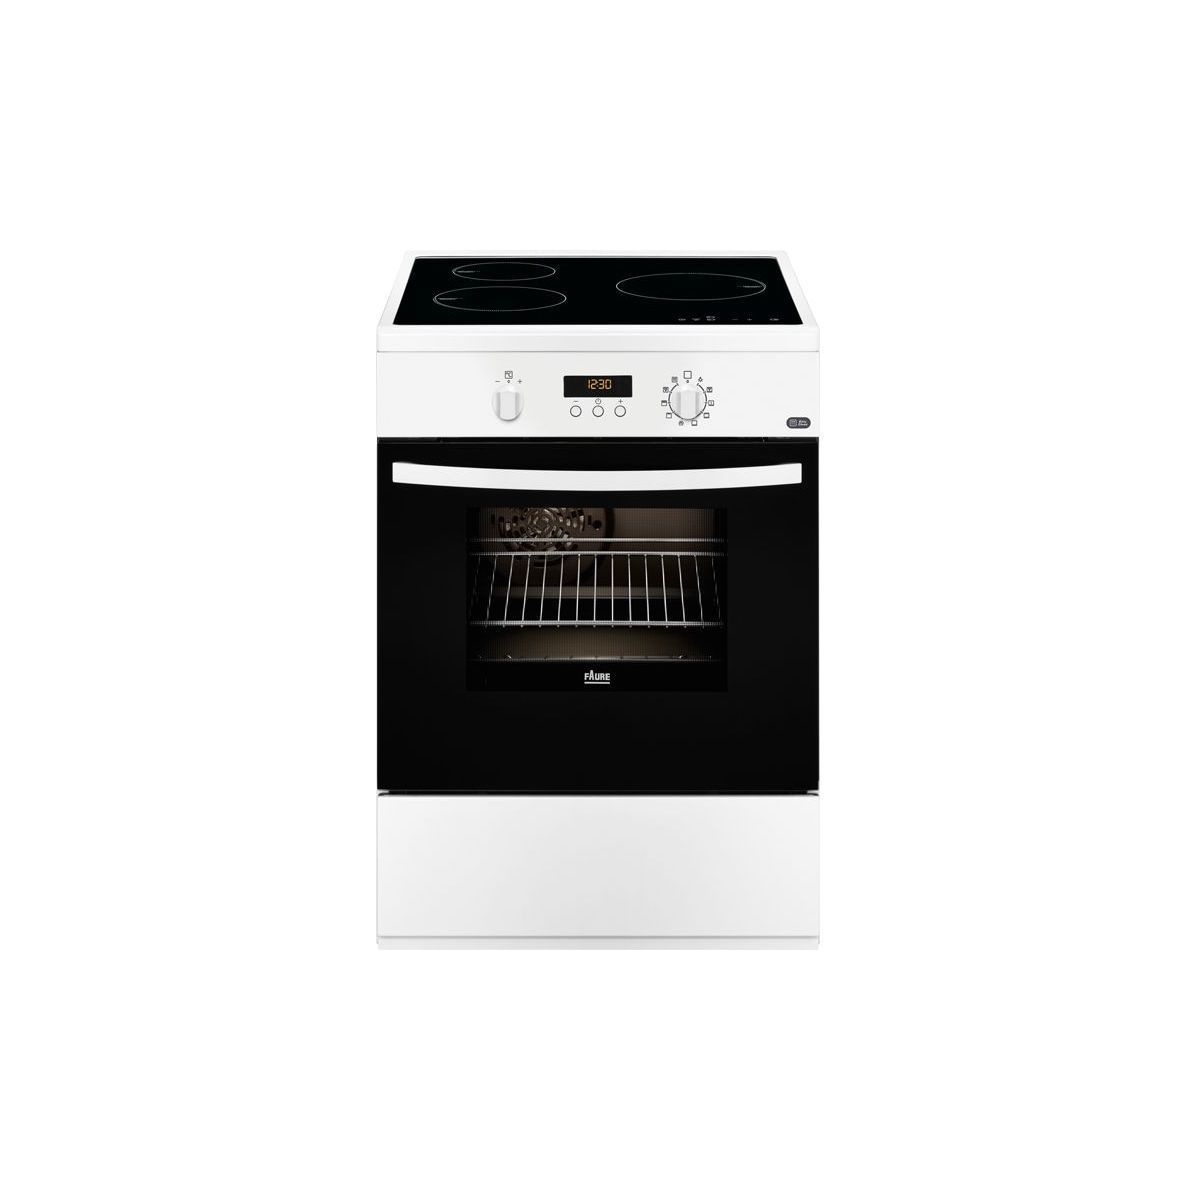 Cuisiniere Induction Faure Fci6530cwa